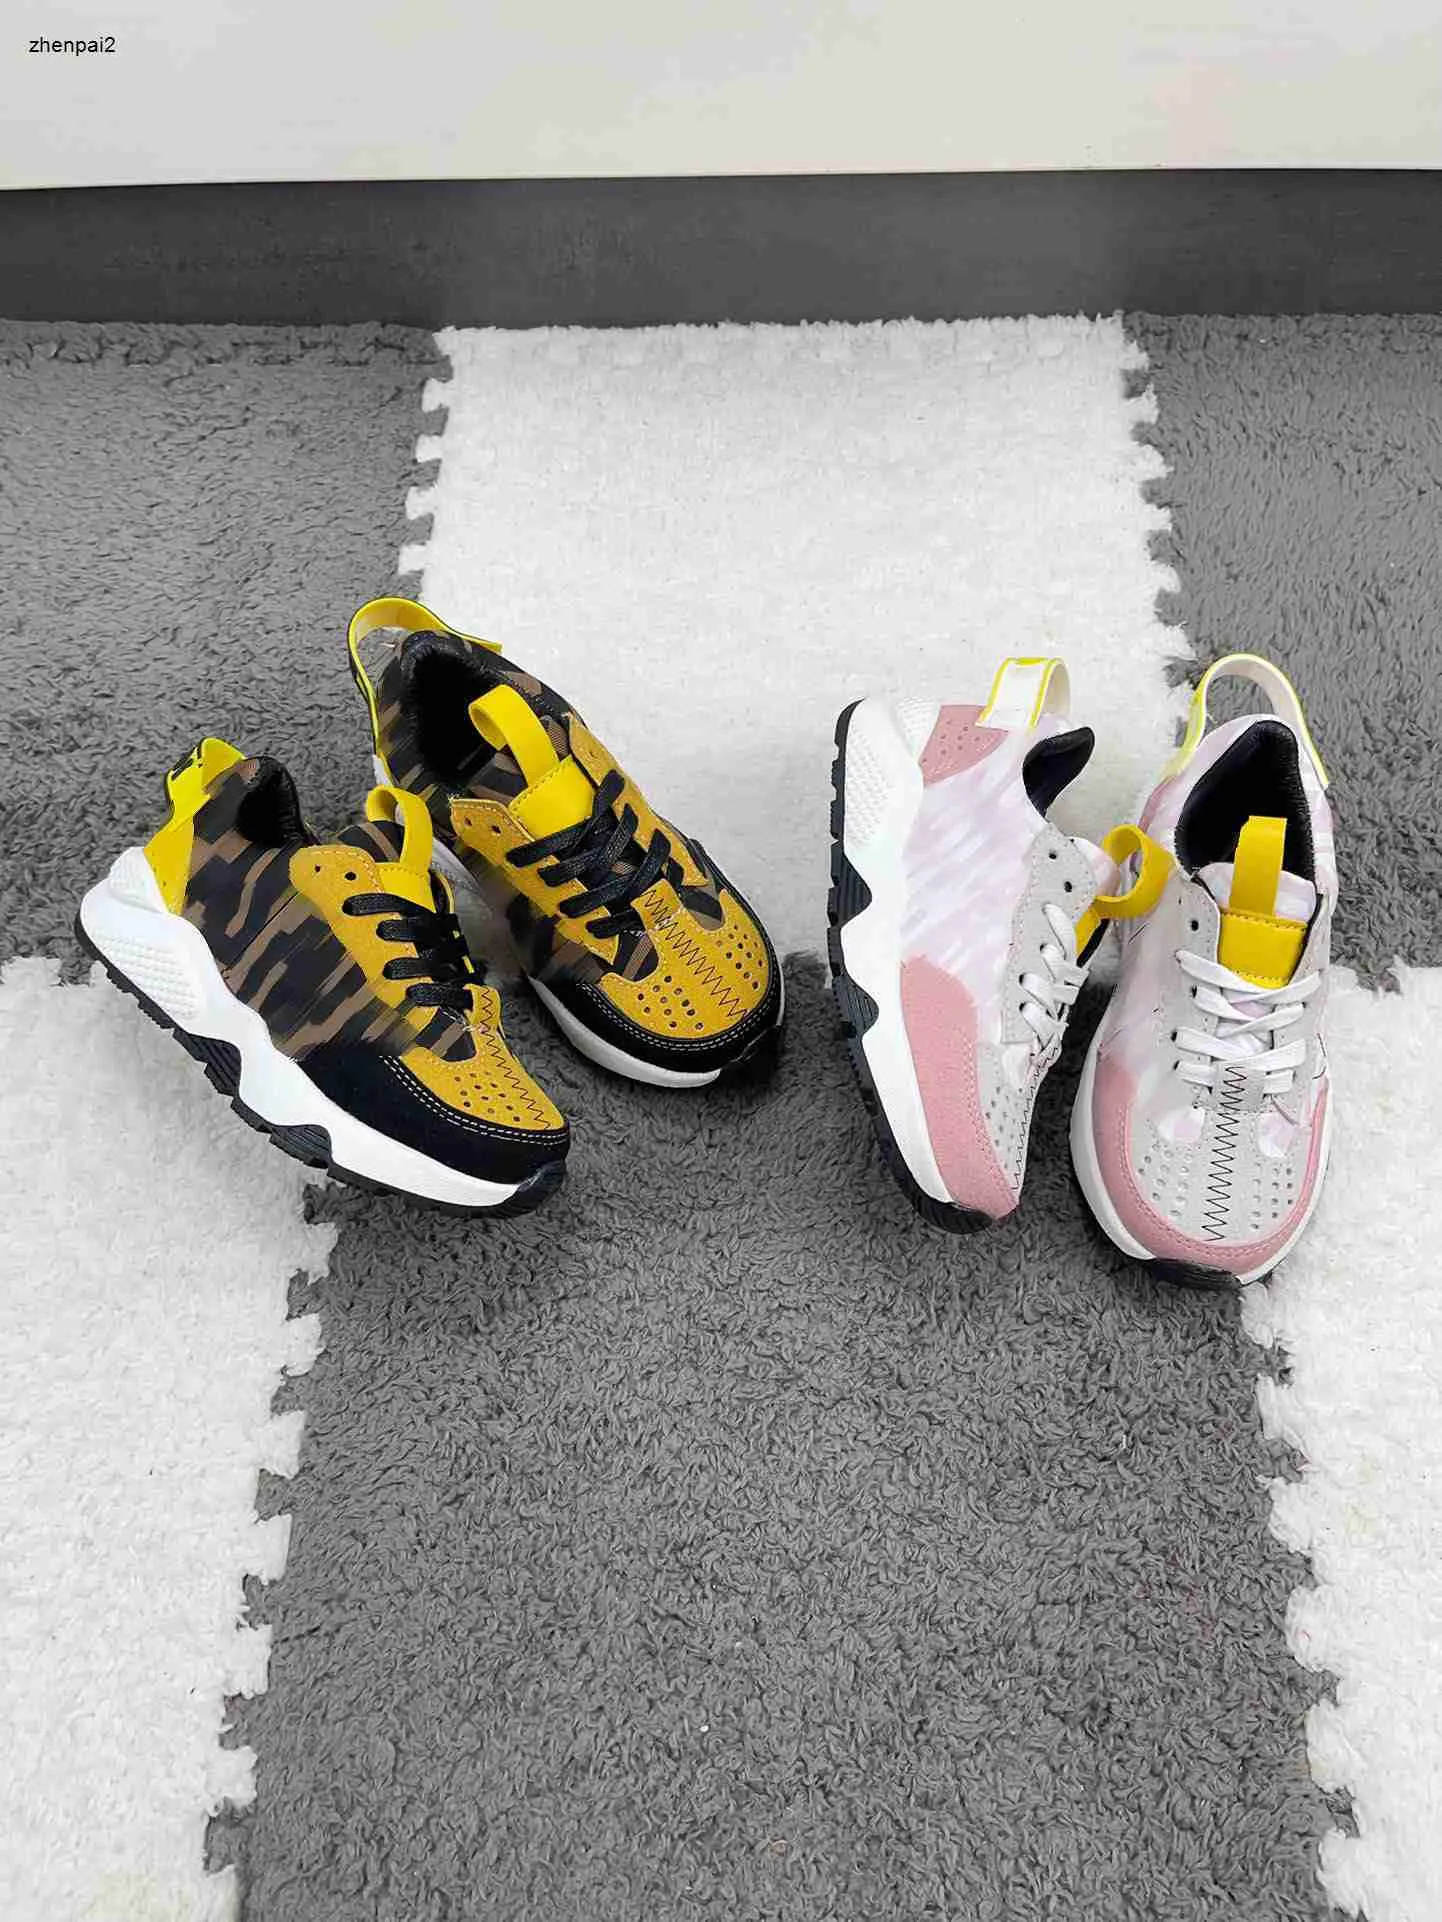 Luxury Kids Shoes Letter Printing Toddler Sneakers Baby Produktstorlek 26-35 Box Packaging Lace-Up Girl Boy Running Shoes Nov25